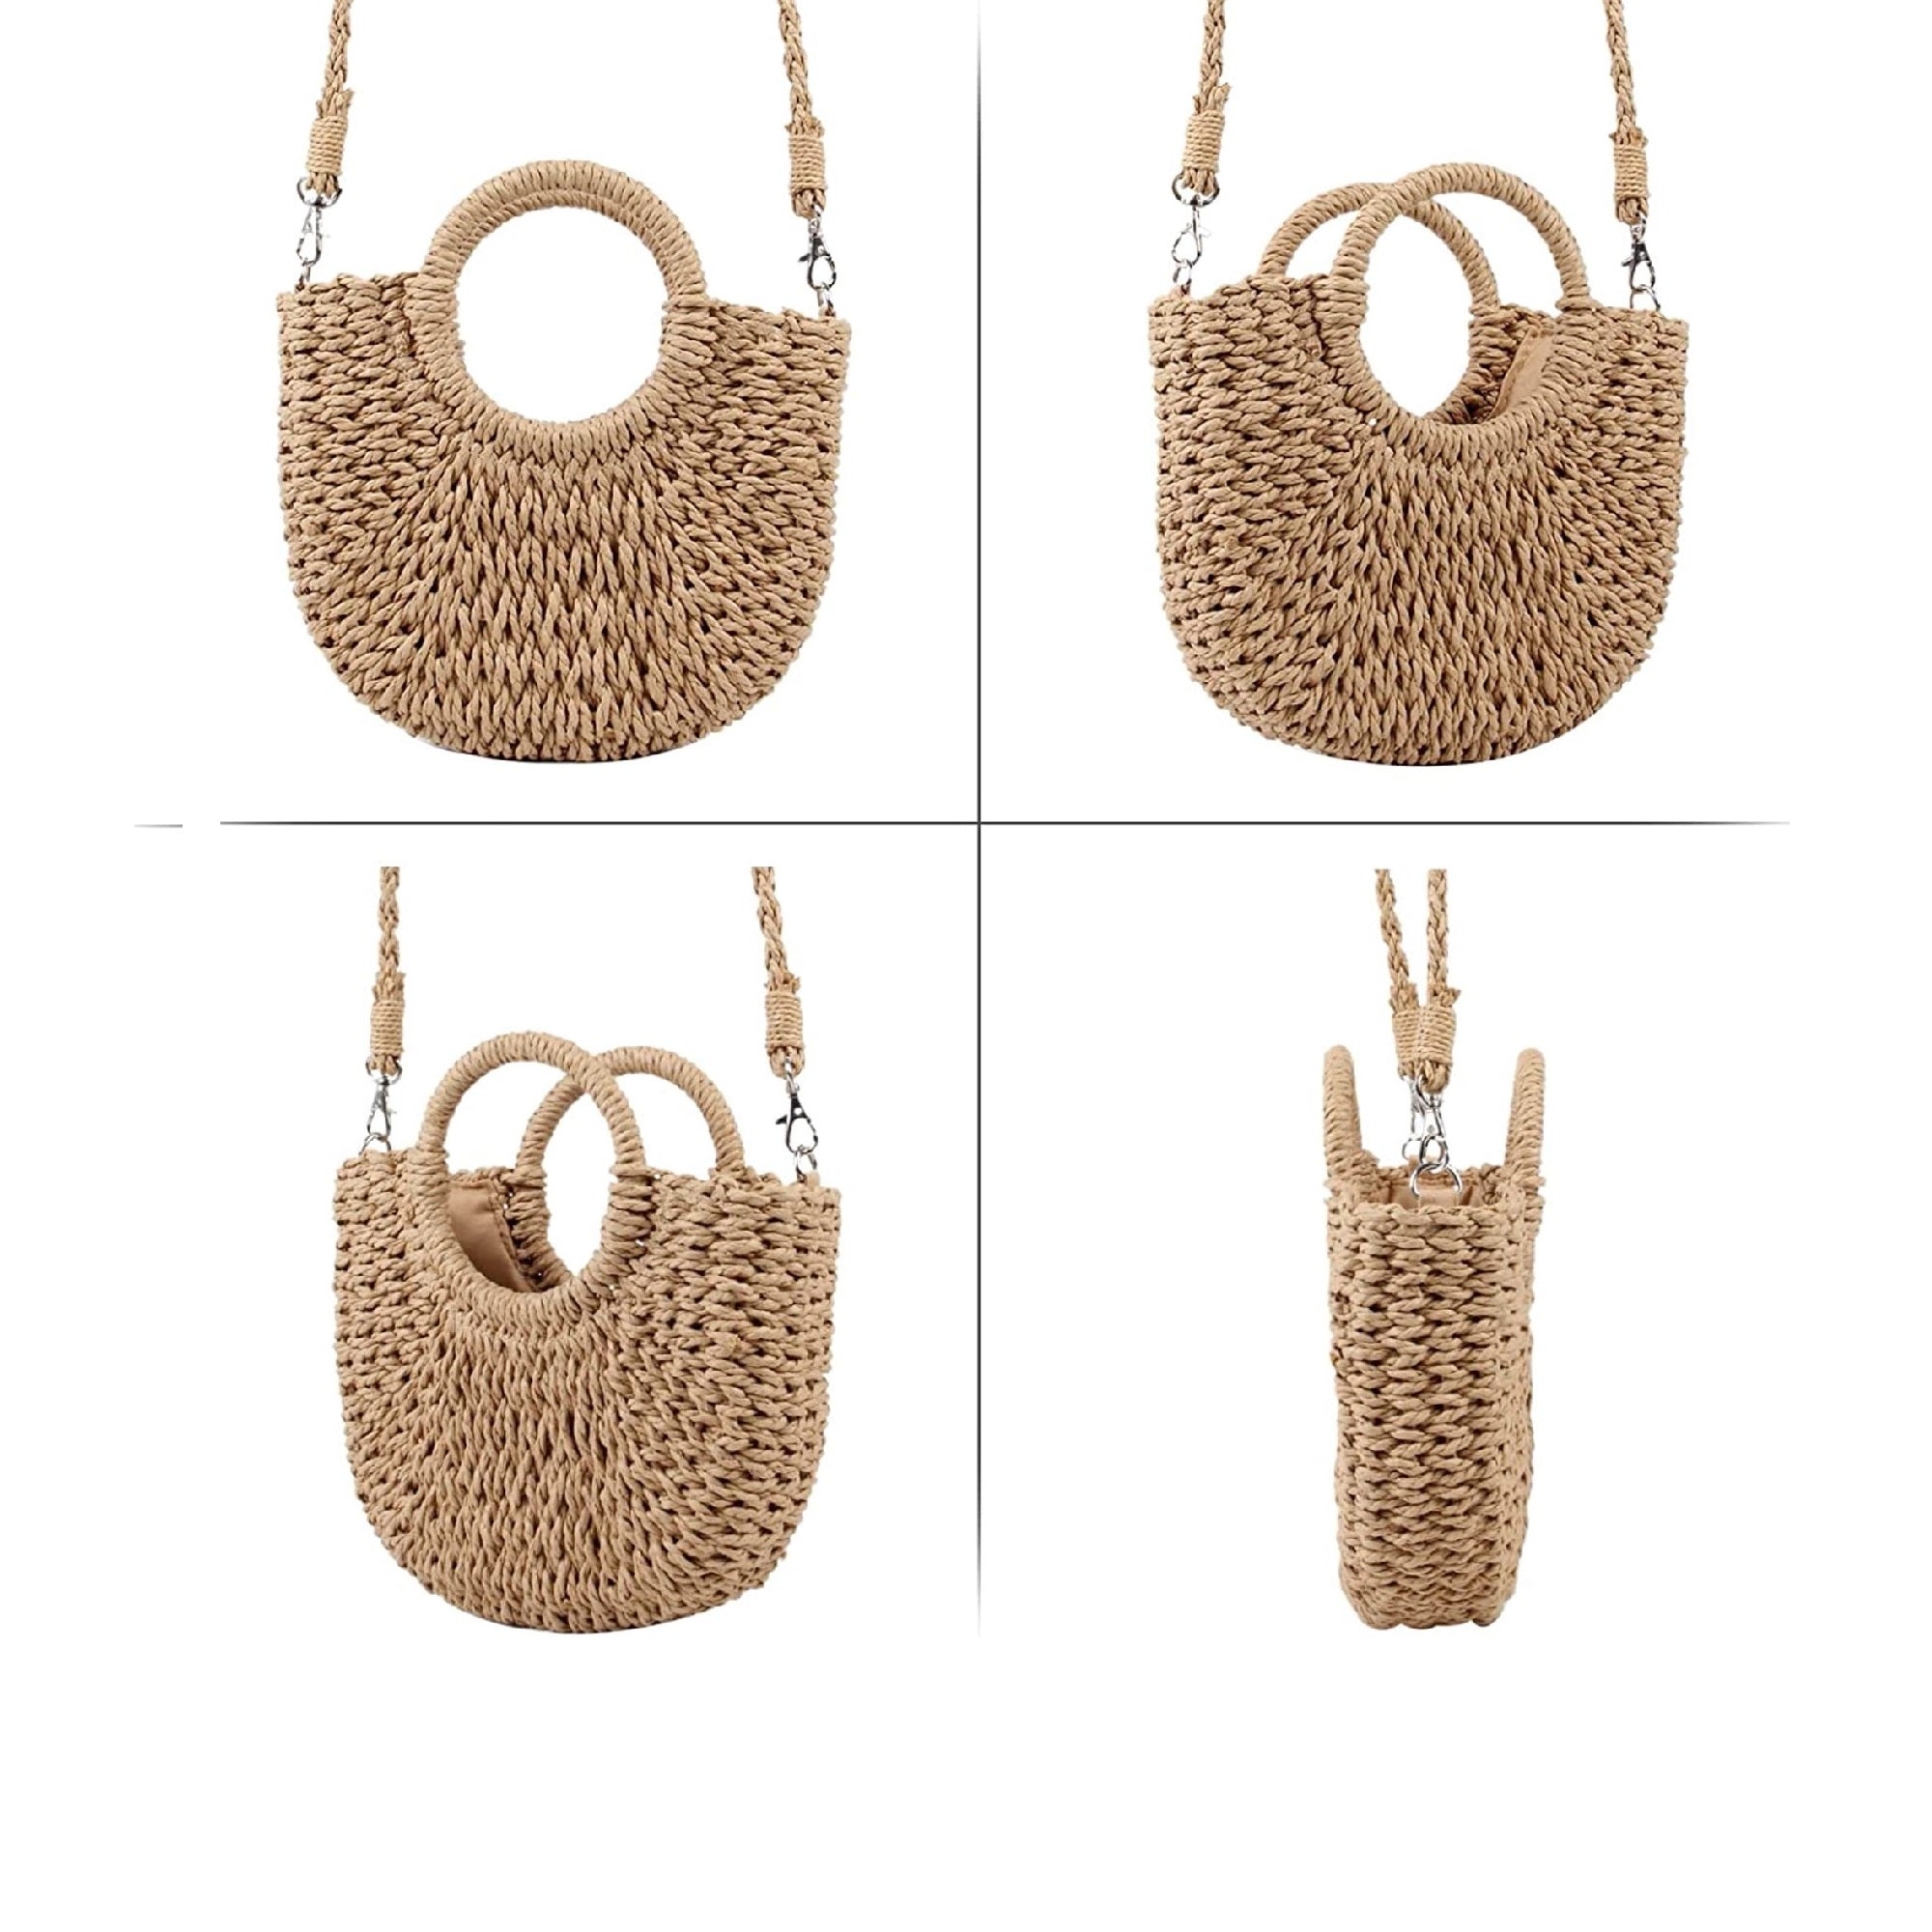 Hand woven straw bag (blue) | TheAfricanMarket.Com